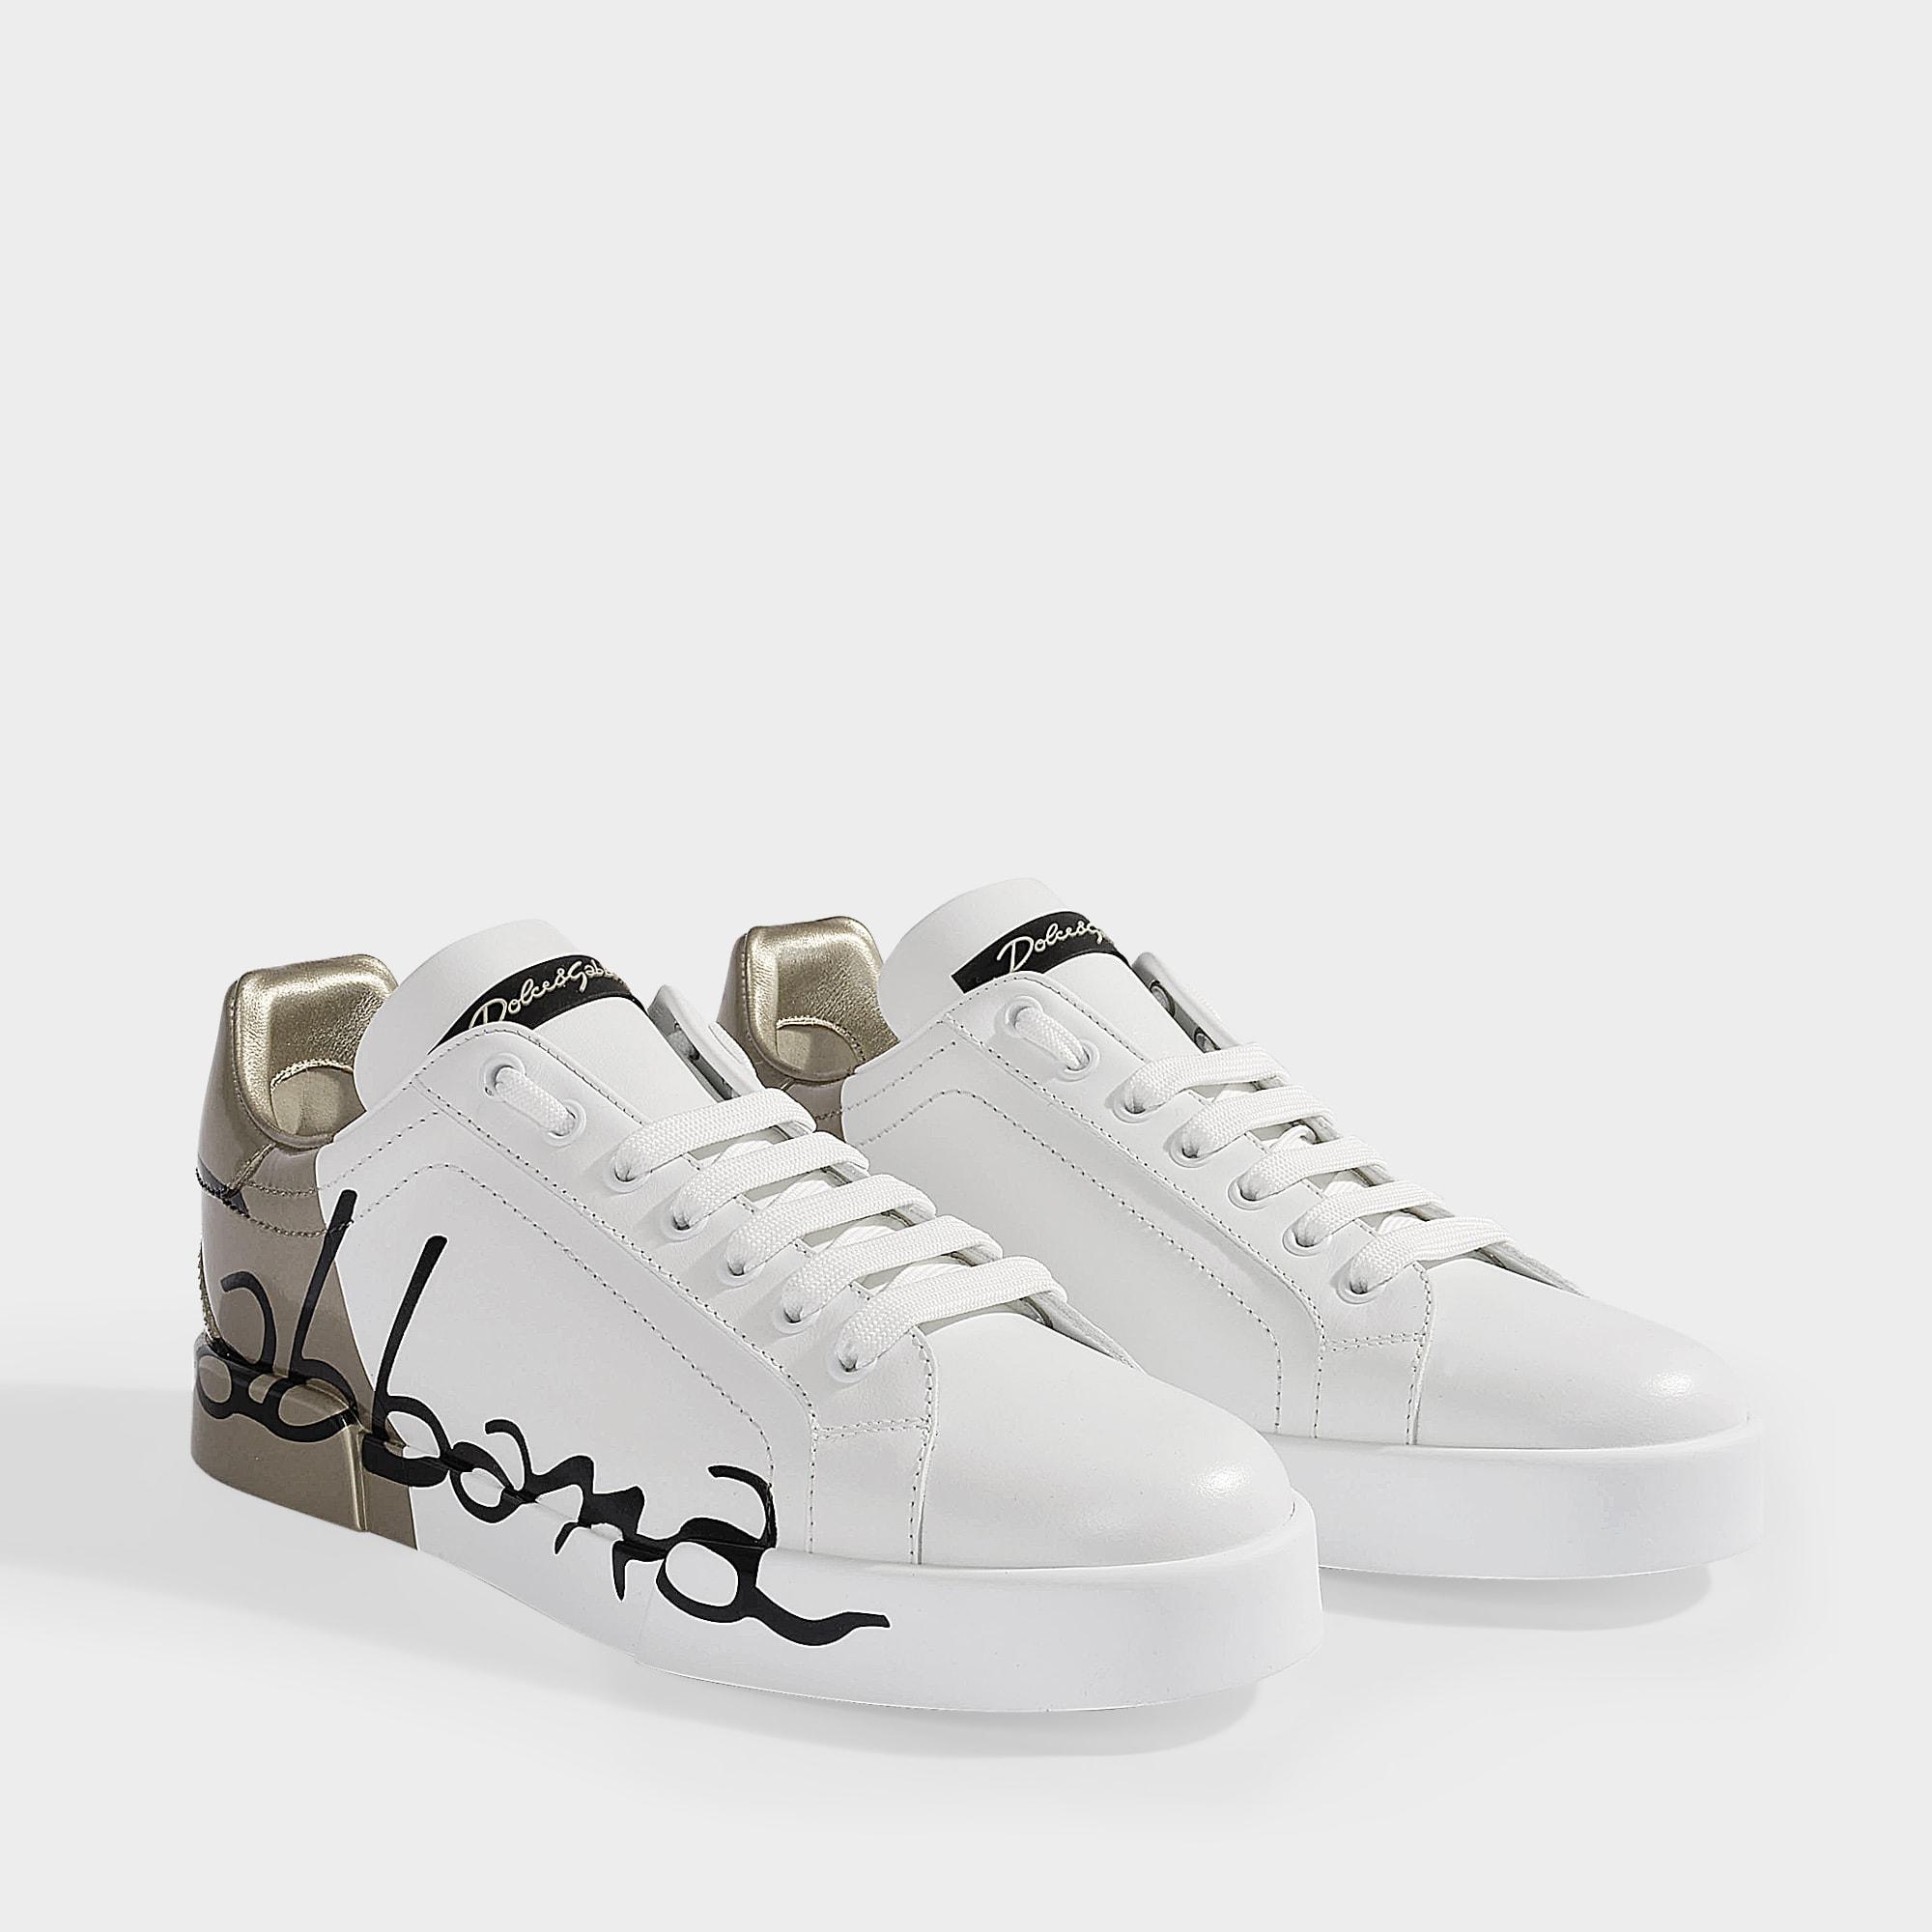 Dolce & Gabbana Gold Logo Printed Sneakers in White | Lyst